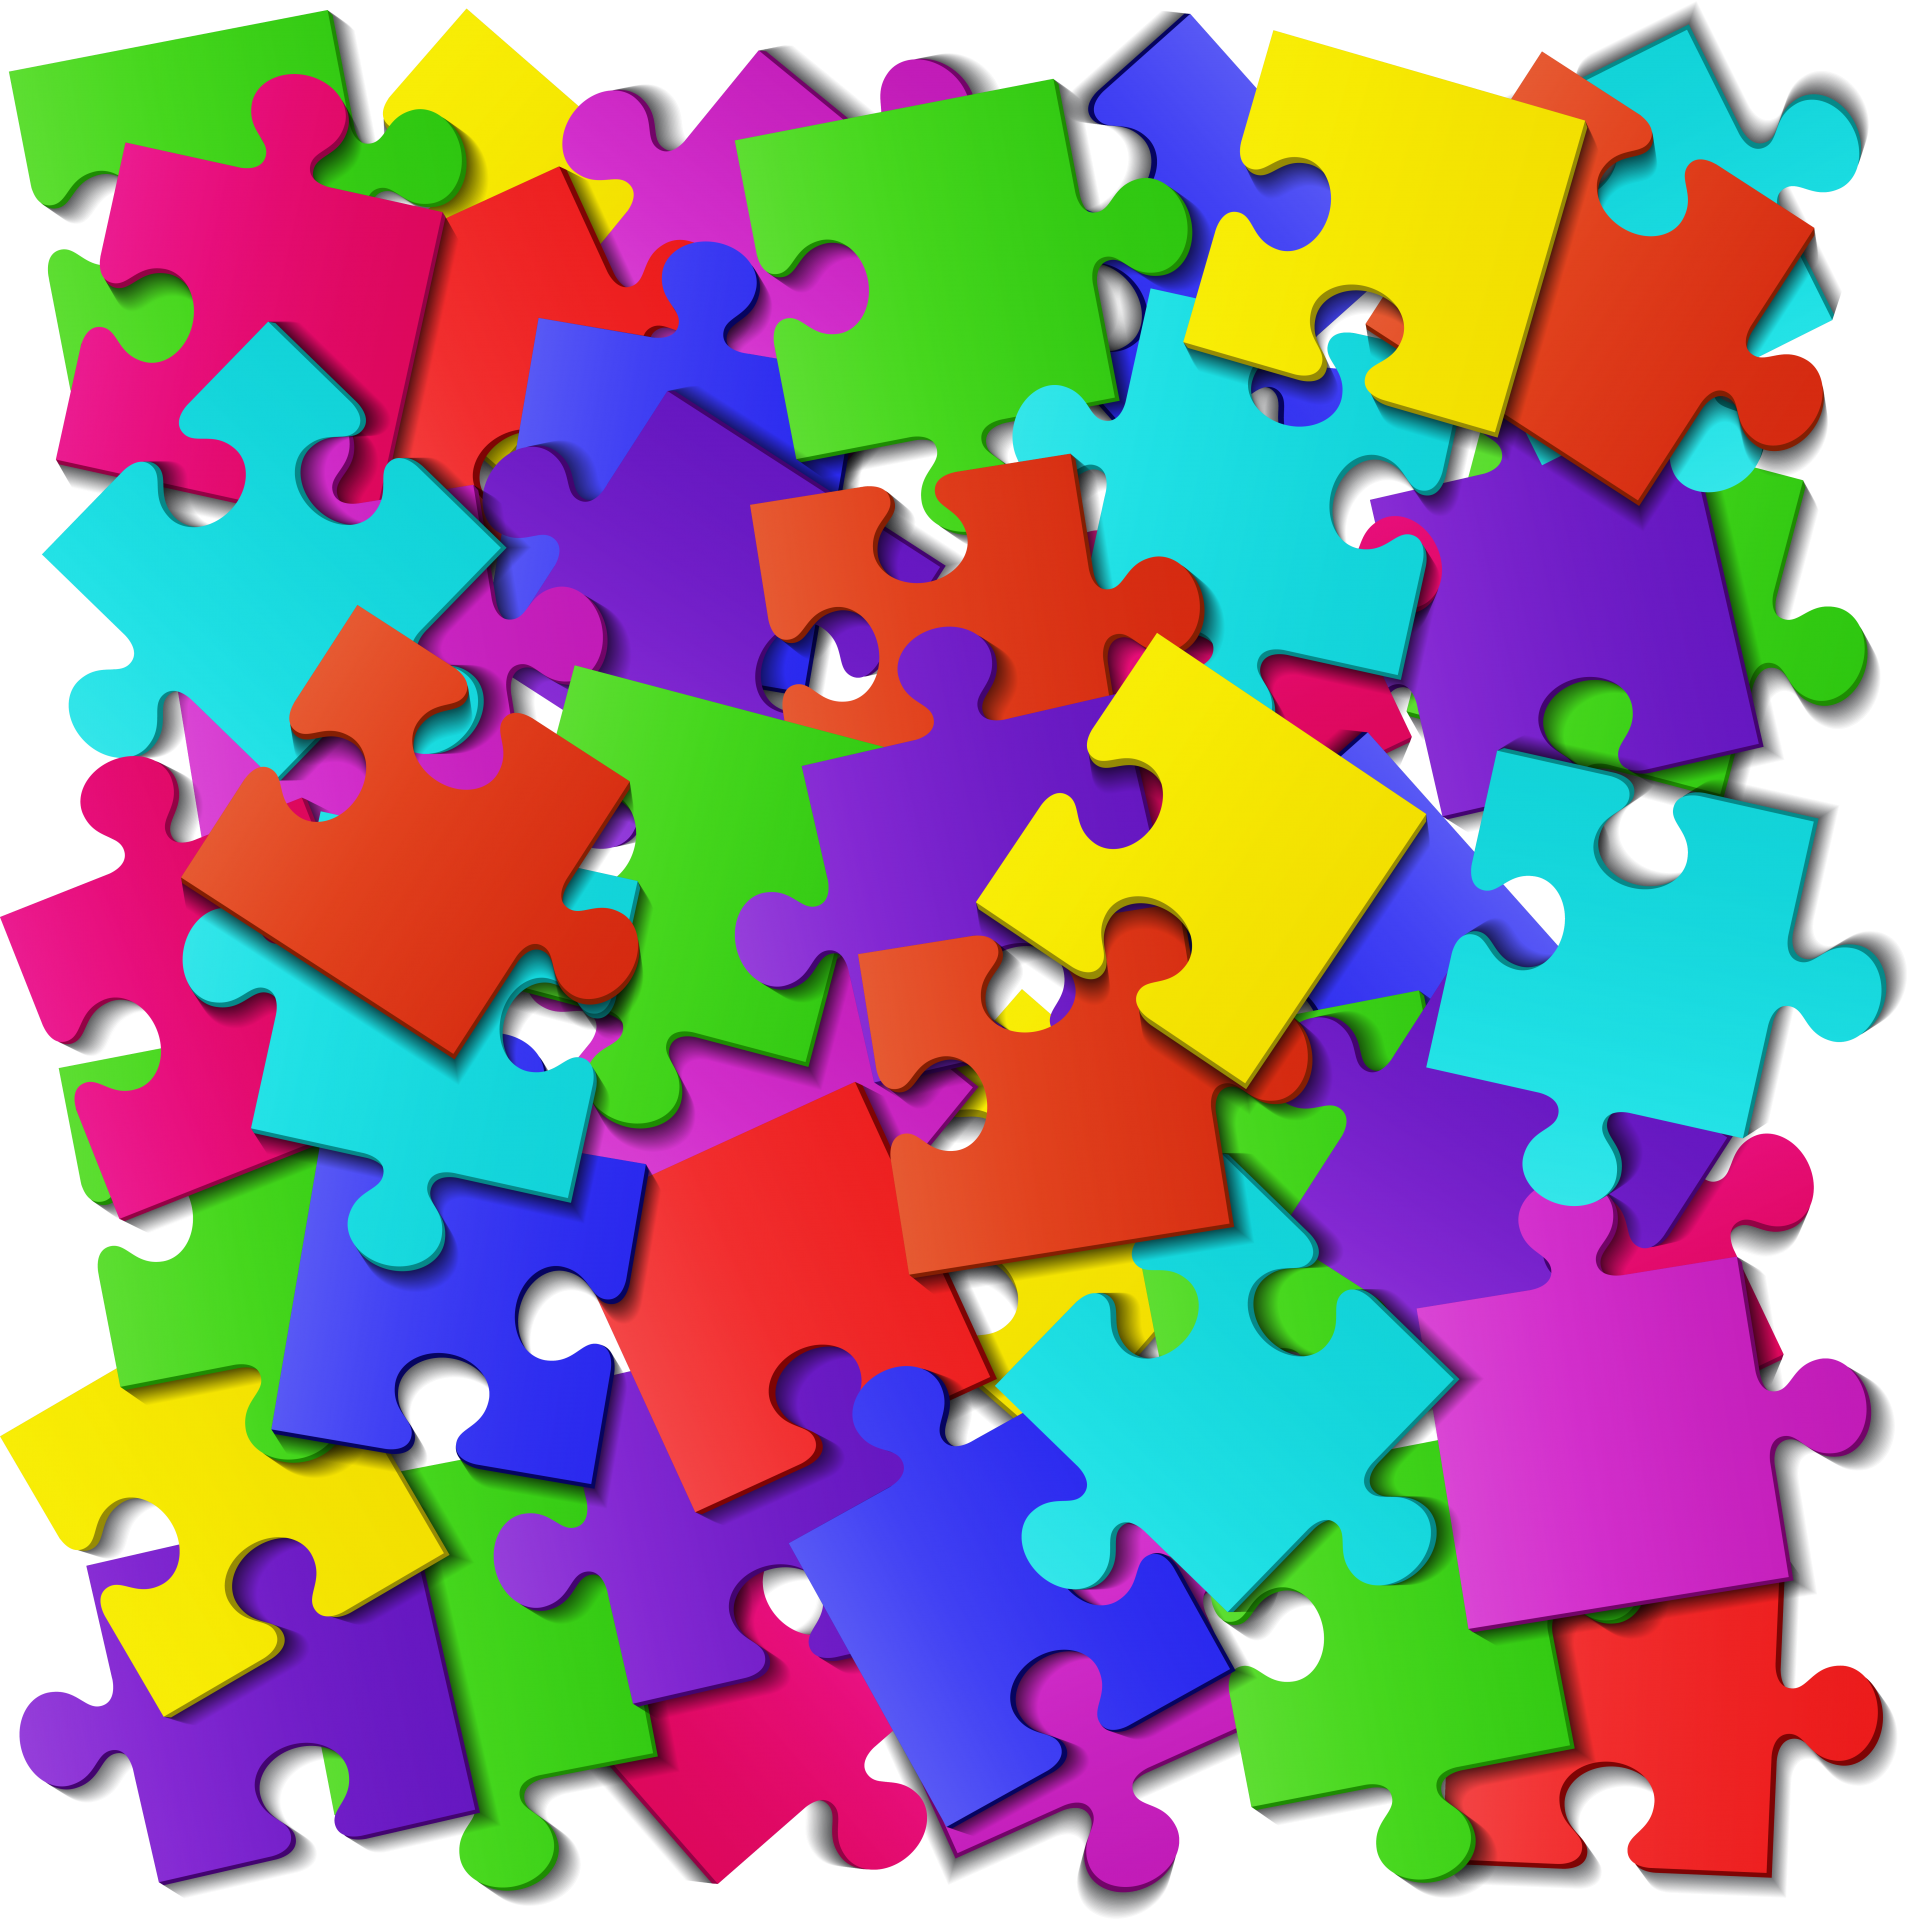 Colorful jigsaw puzzle pieces